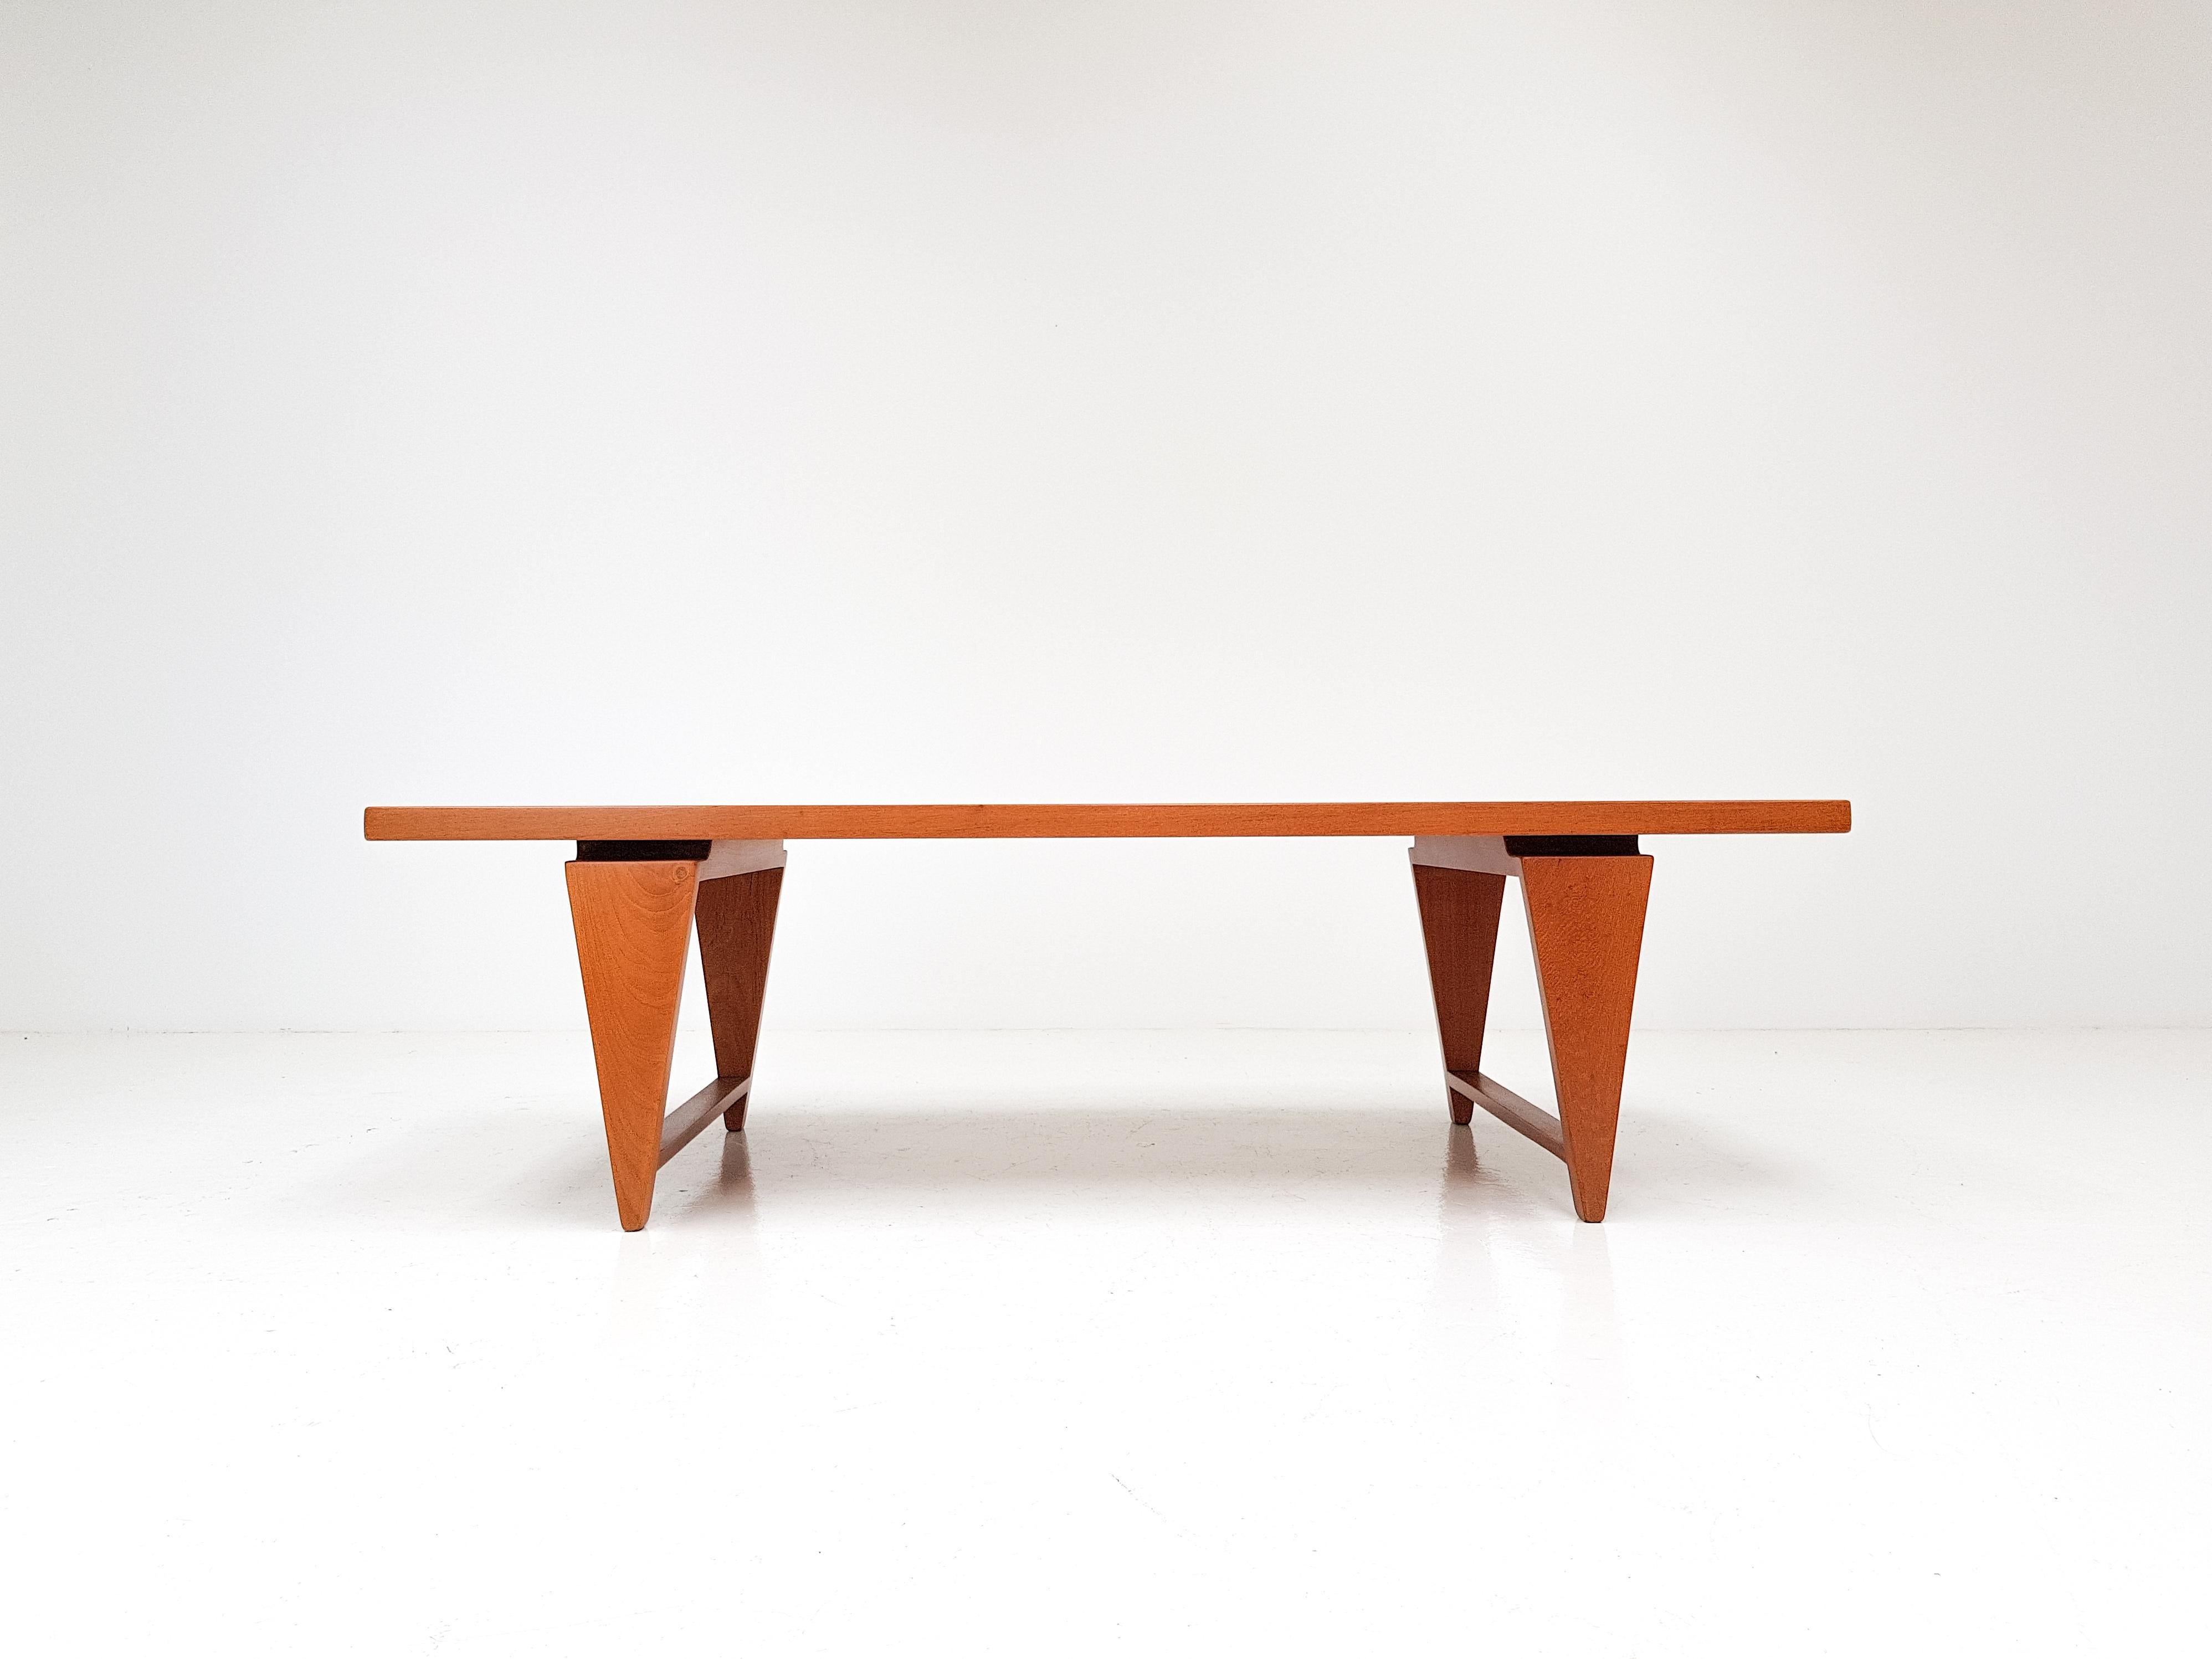 A solid teak coffee table by Illum Wikkelsø, with signature pyramidal tapered legs which feature in many of his designs and a floating top.

This is a heavy piece with offers a very high-quality feel and impactful presence, the leg shape offers a